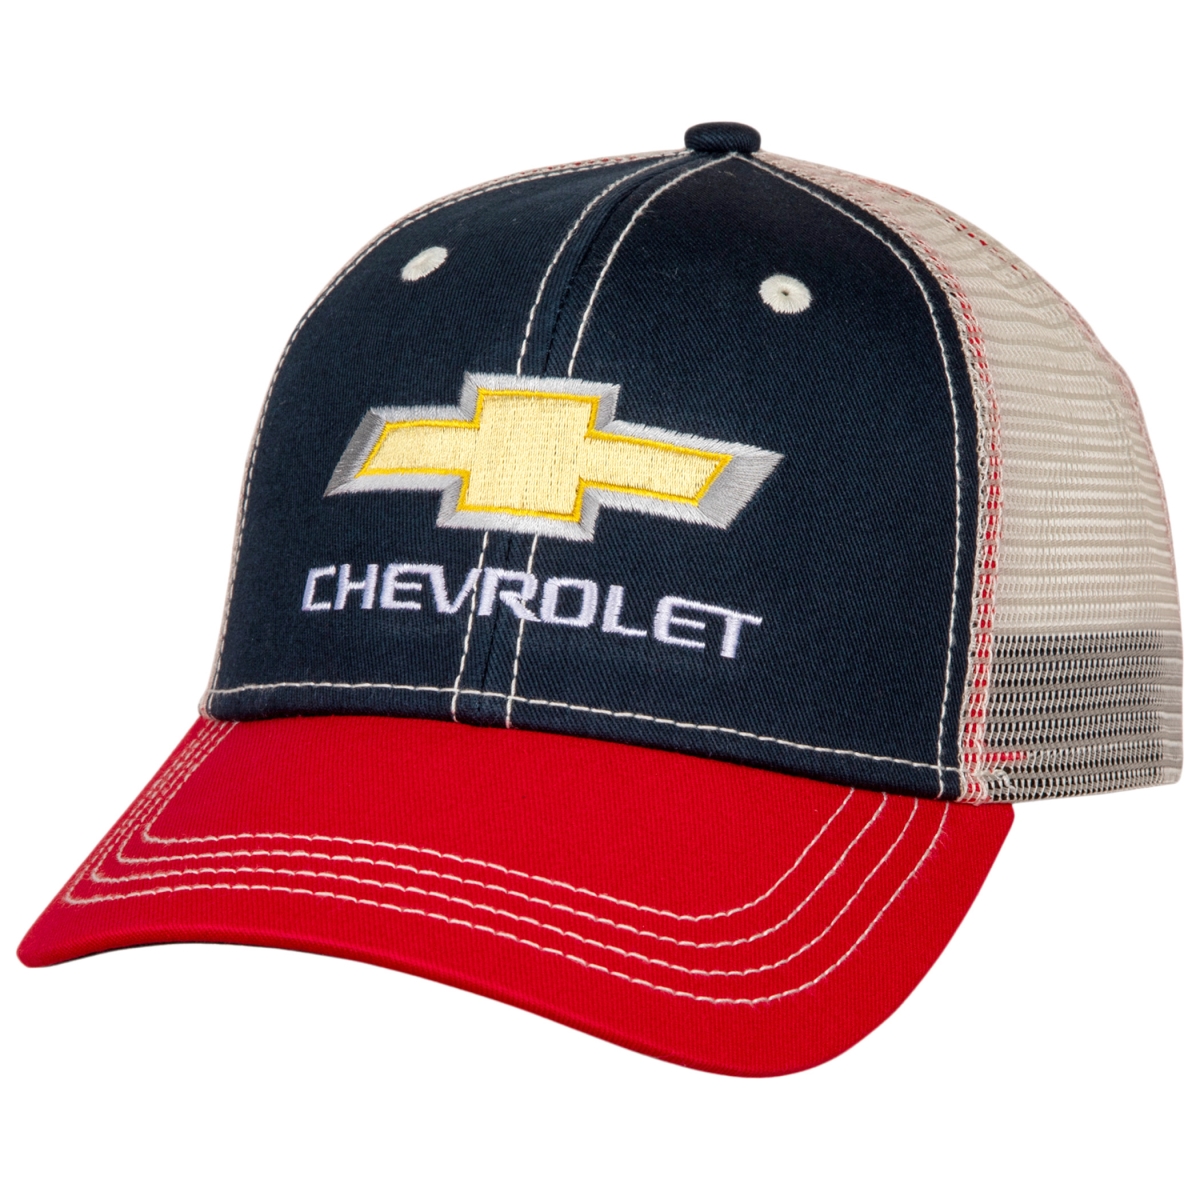 Picture of Chevy 810494 Chevrolet Logo Adjustable Mesh Snapback Hat